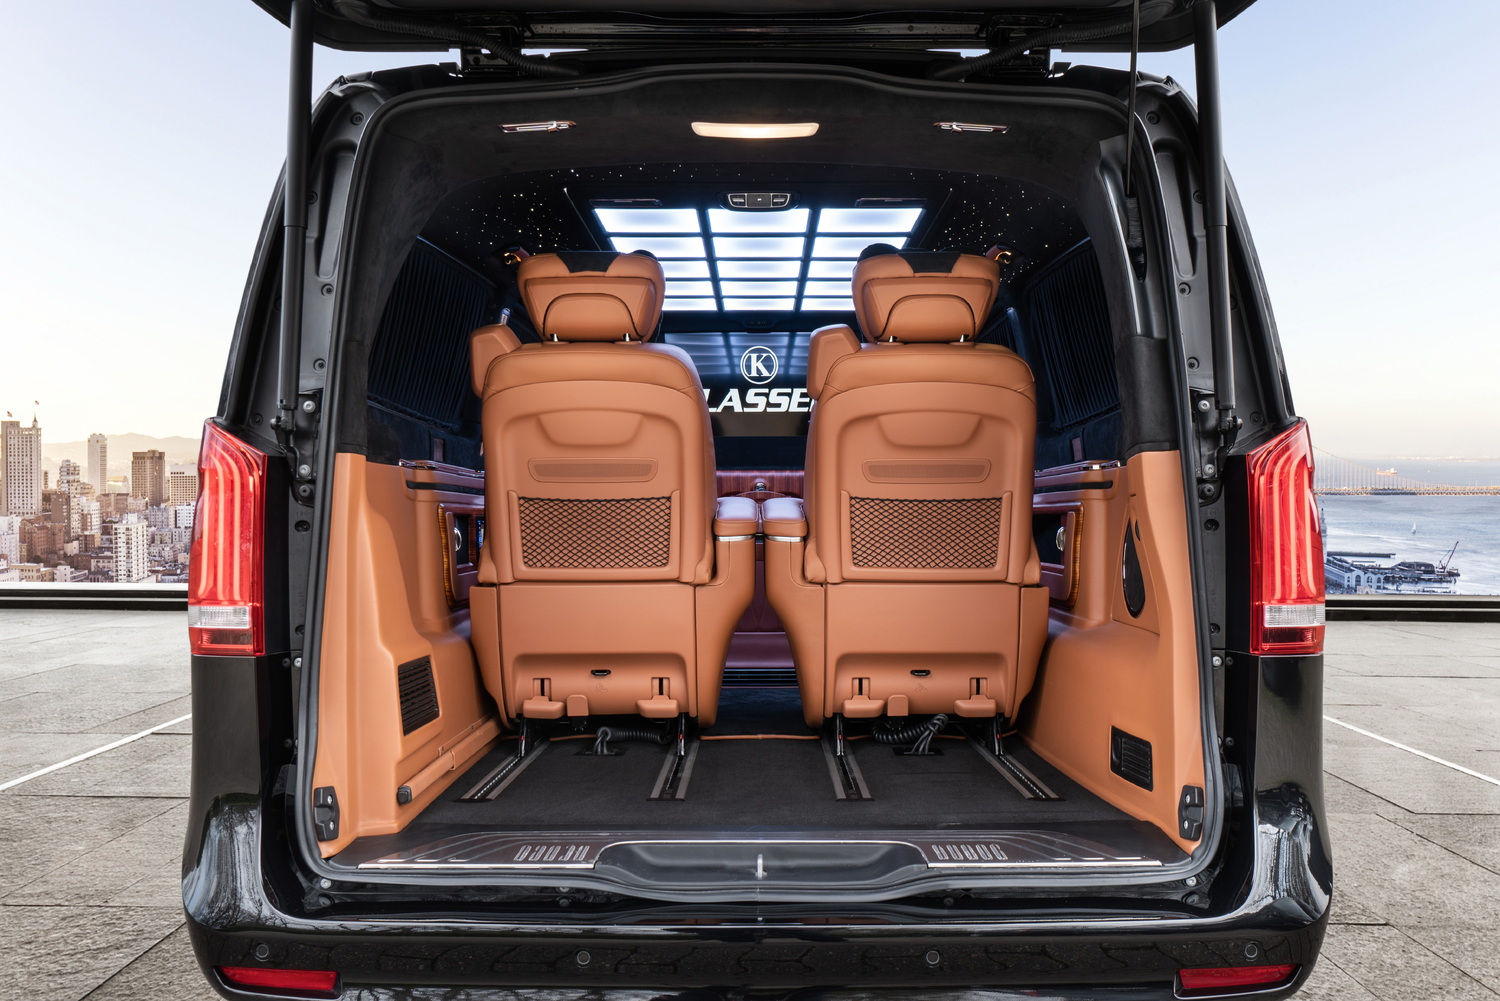 Our Mercedes-Benz V-Class offers plenty of space to work and switch off. Comfort, safety and productivity. Find out now!